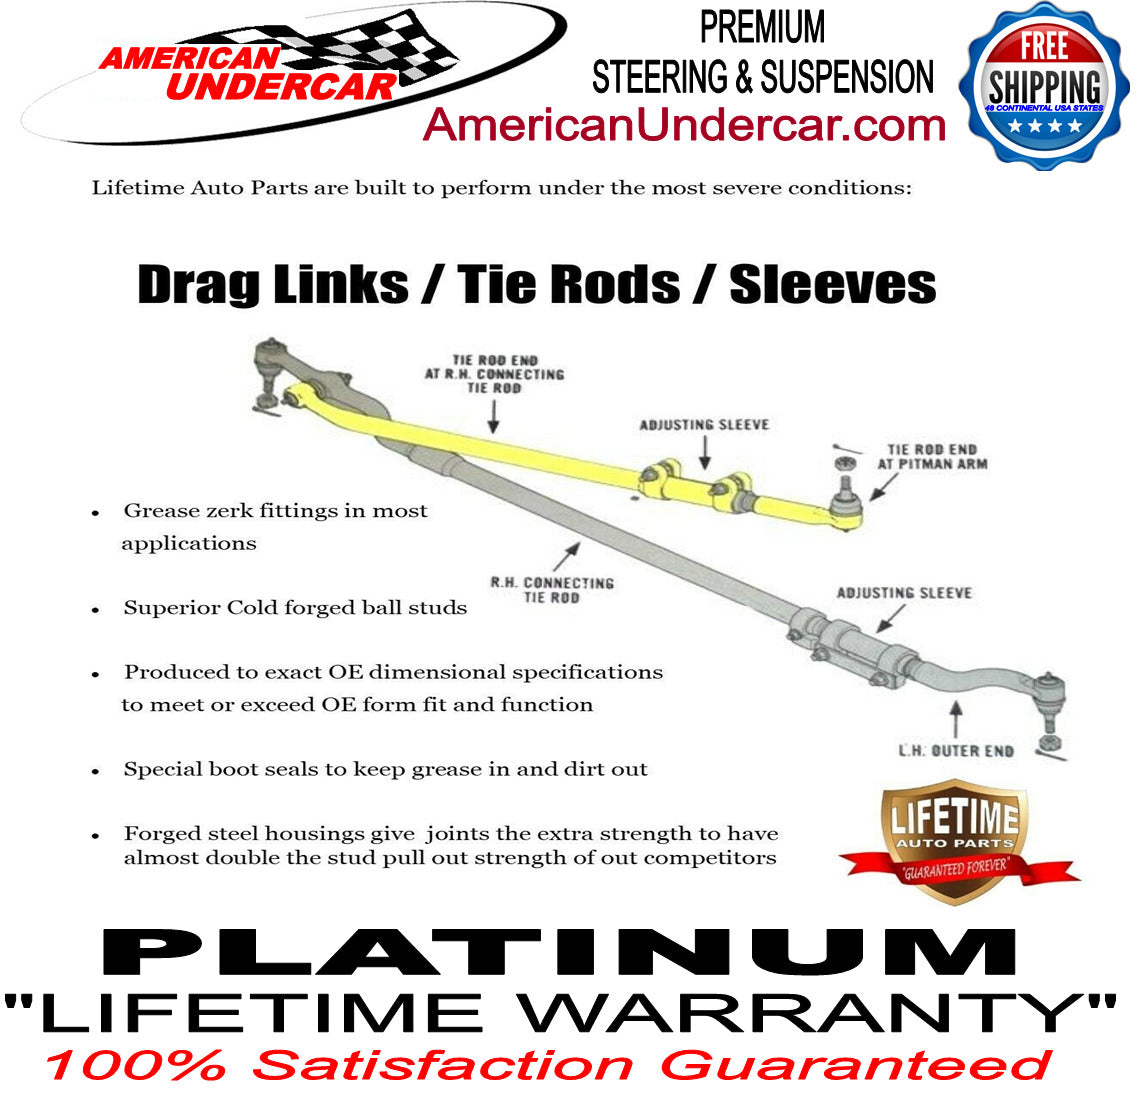 Lifetime Ball Joint Tie Rod Drag Link Steering Kit for 2005-2007 Ford F250, F350 Super Duty 4x4